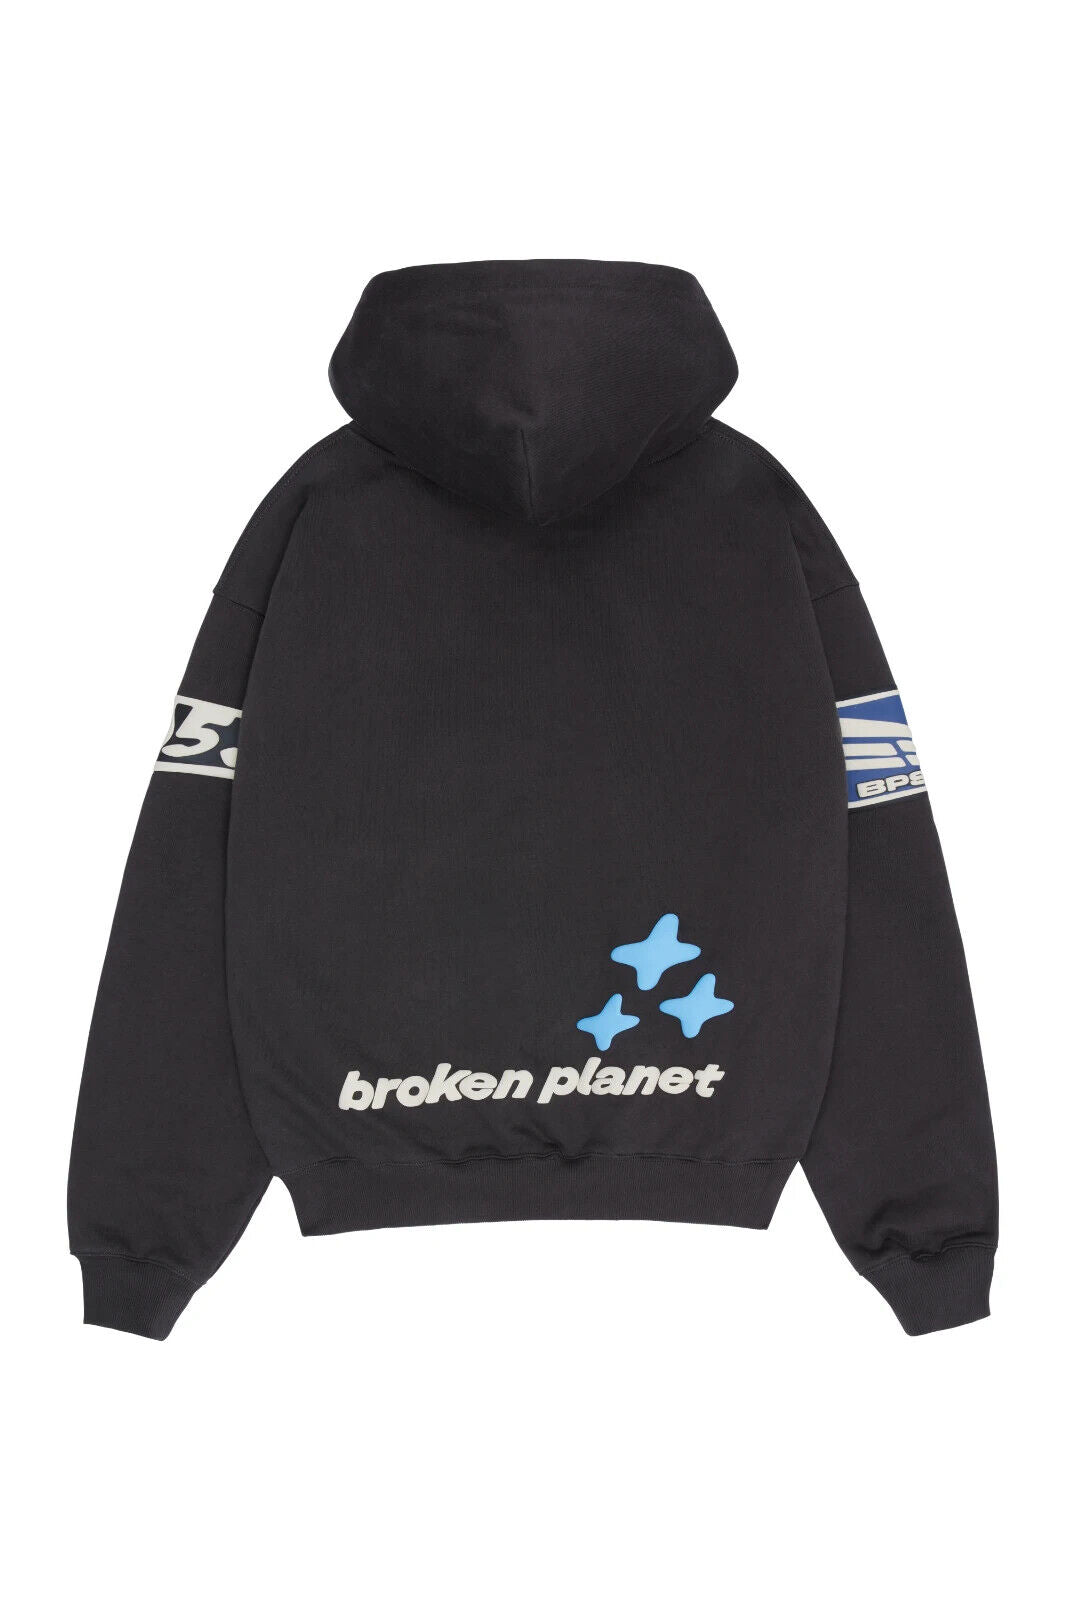 BROKEN PLANET 'ESCAPE TO THE FUTURE' SOOT BLACK HOODIE